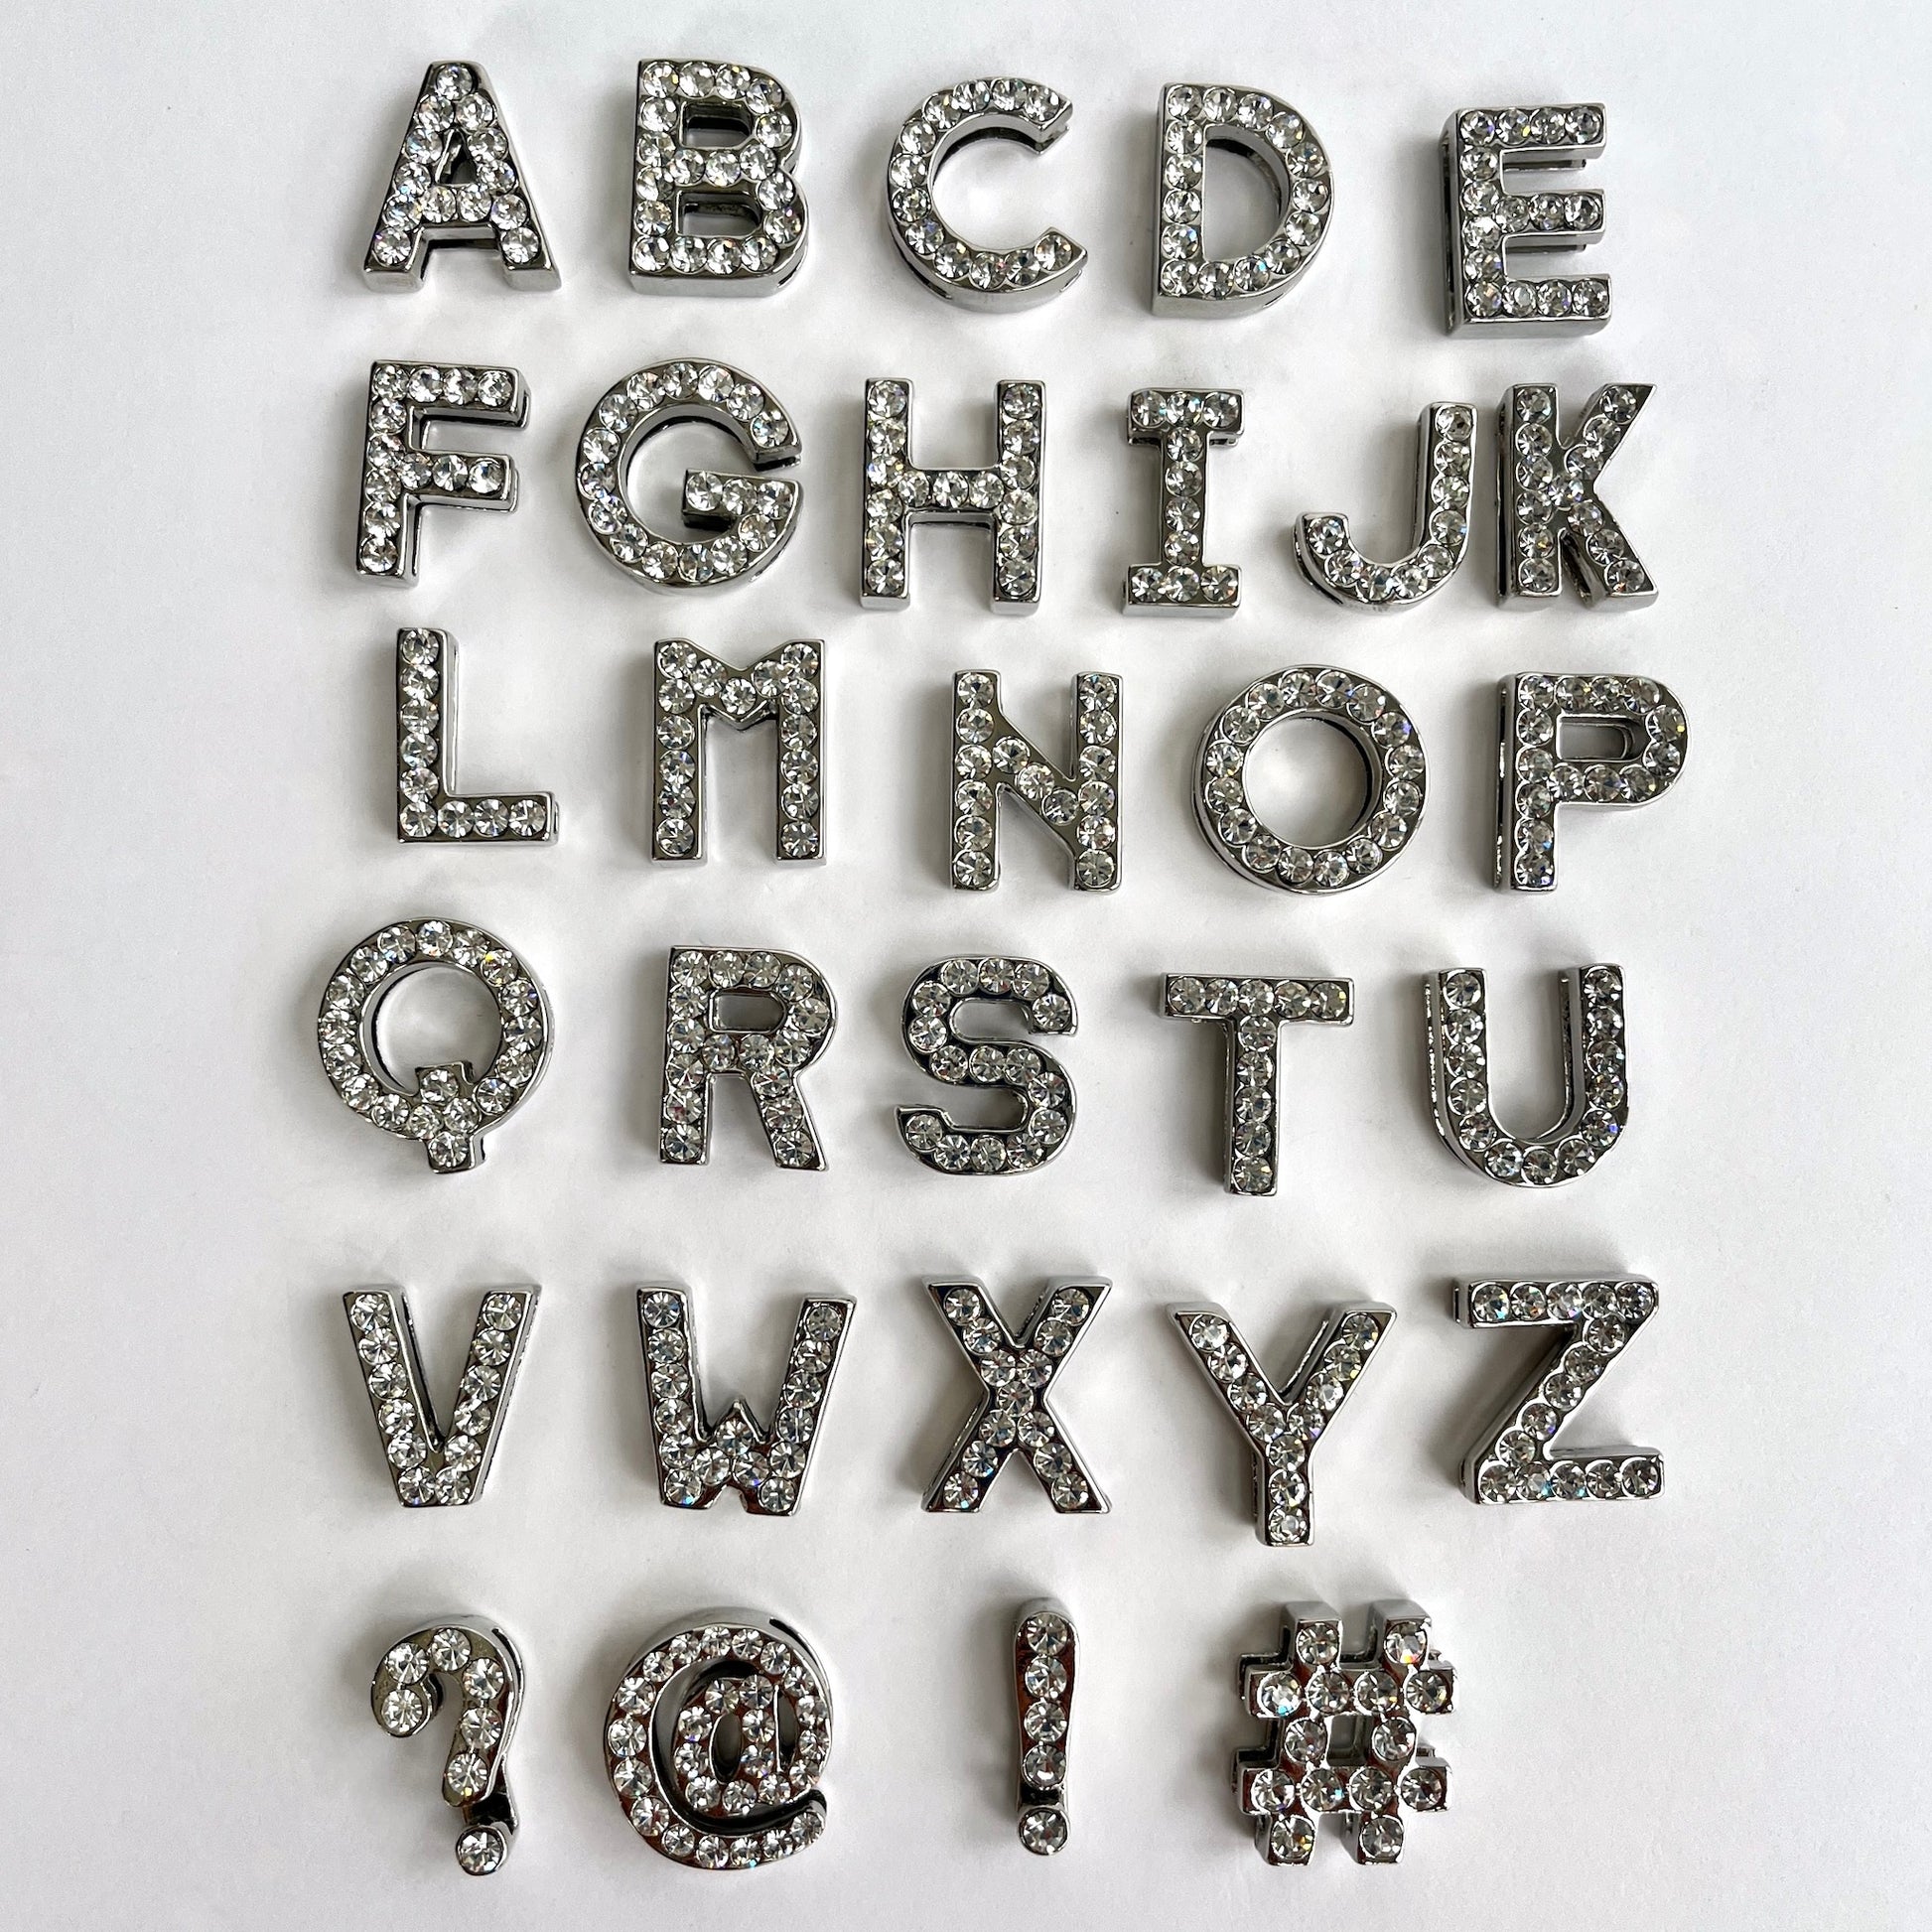 20mm diamante crystal alphabet letters and symbols-KLEINS-DEADSTOCK-HABERDASHERY